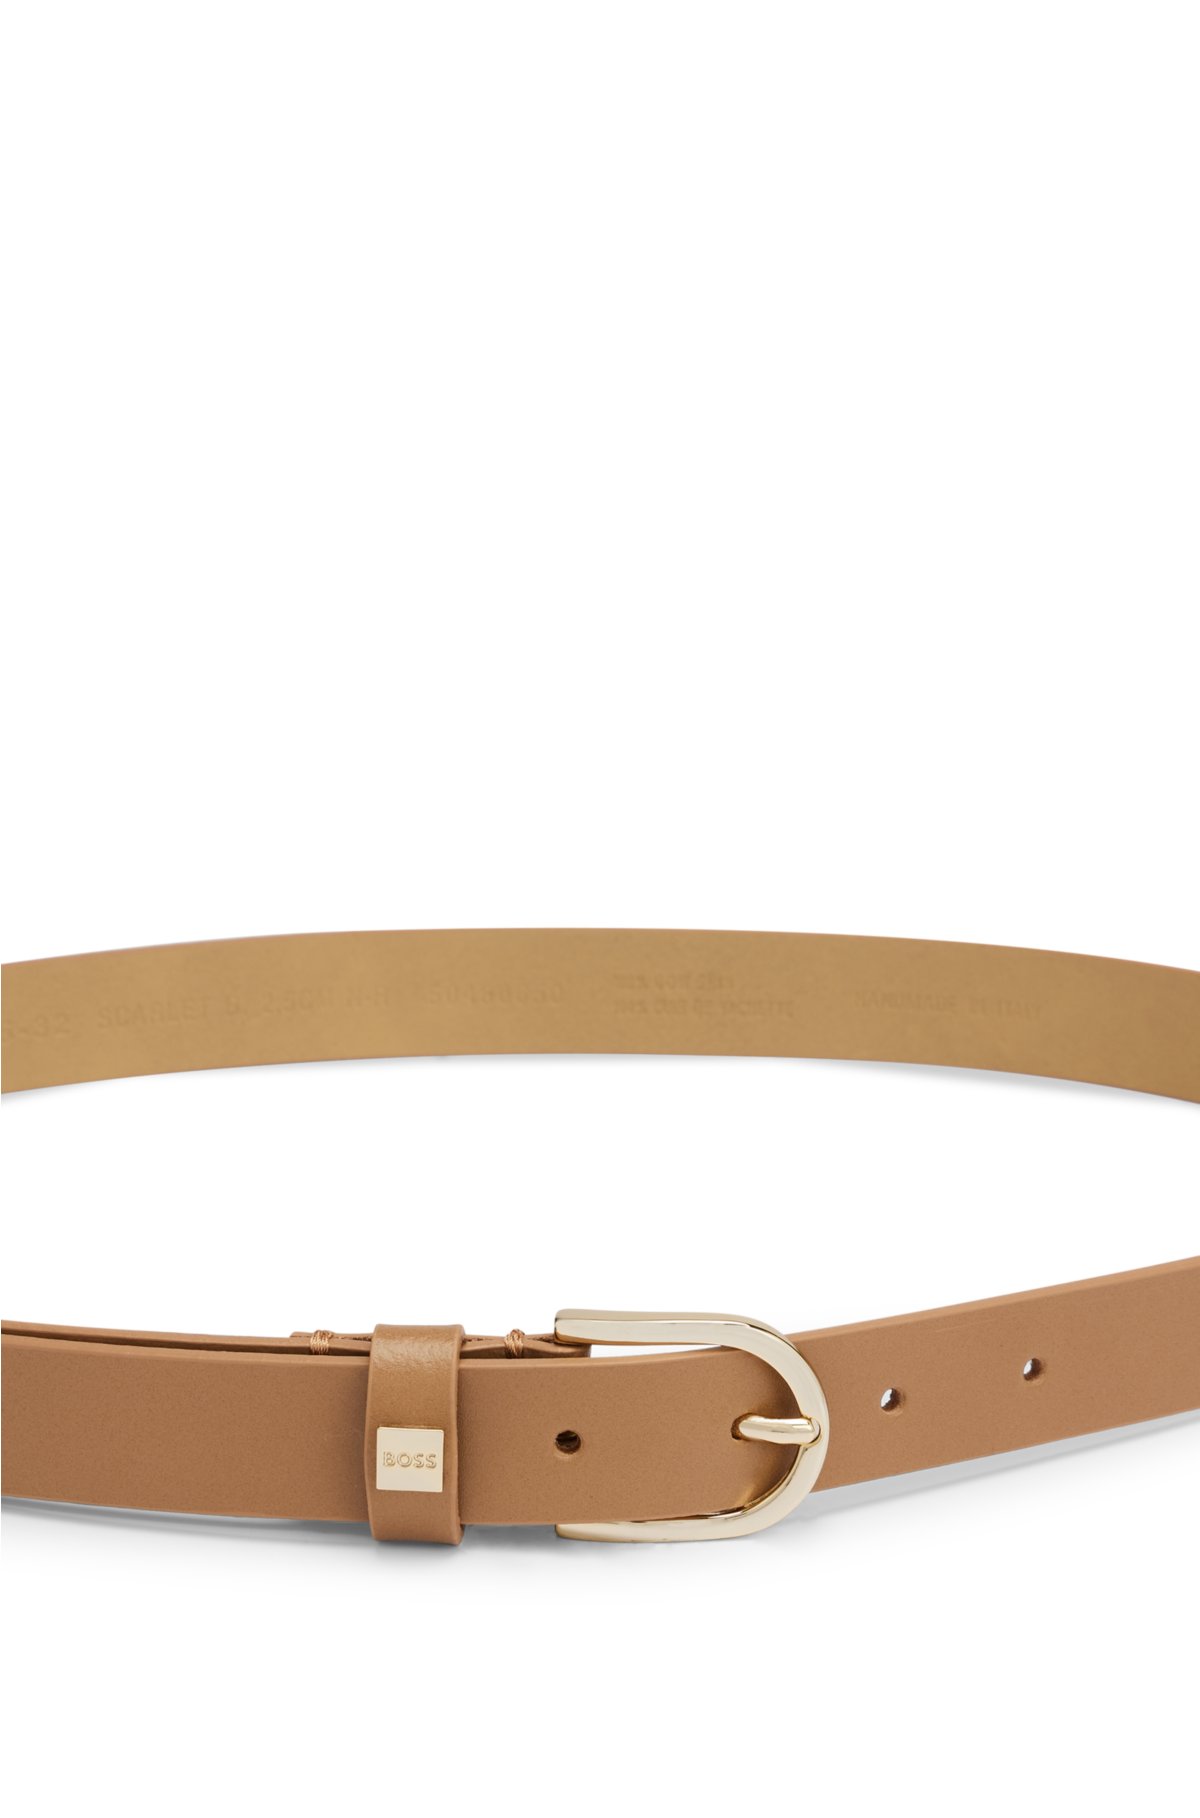 Italian-leather belt with gold-tone buckle, Brown